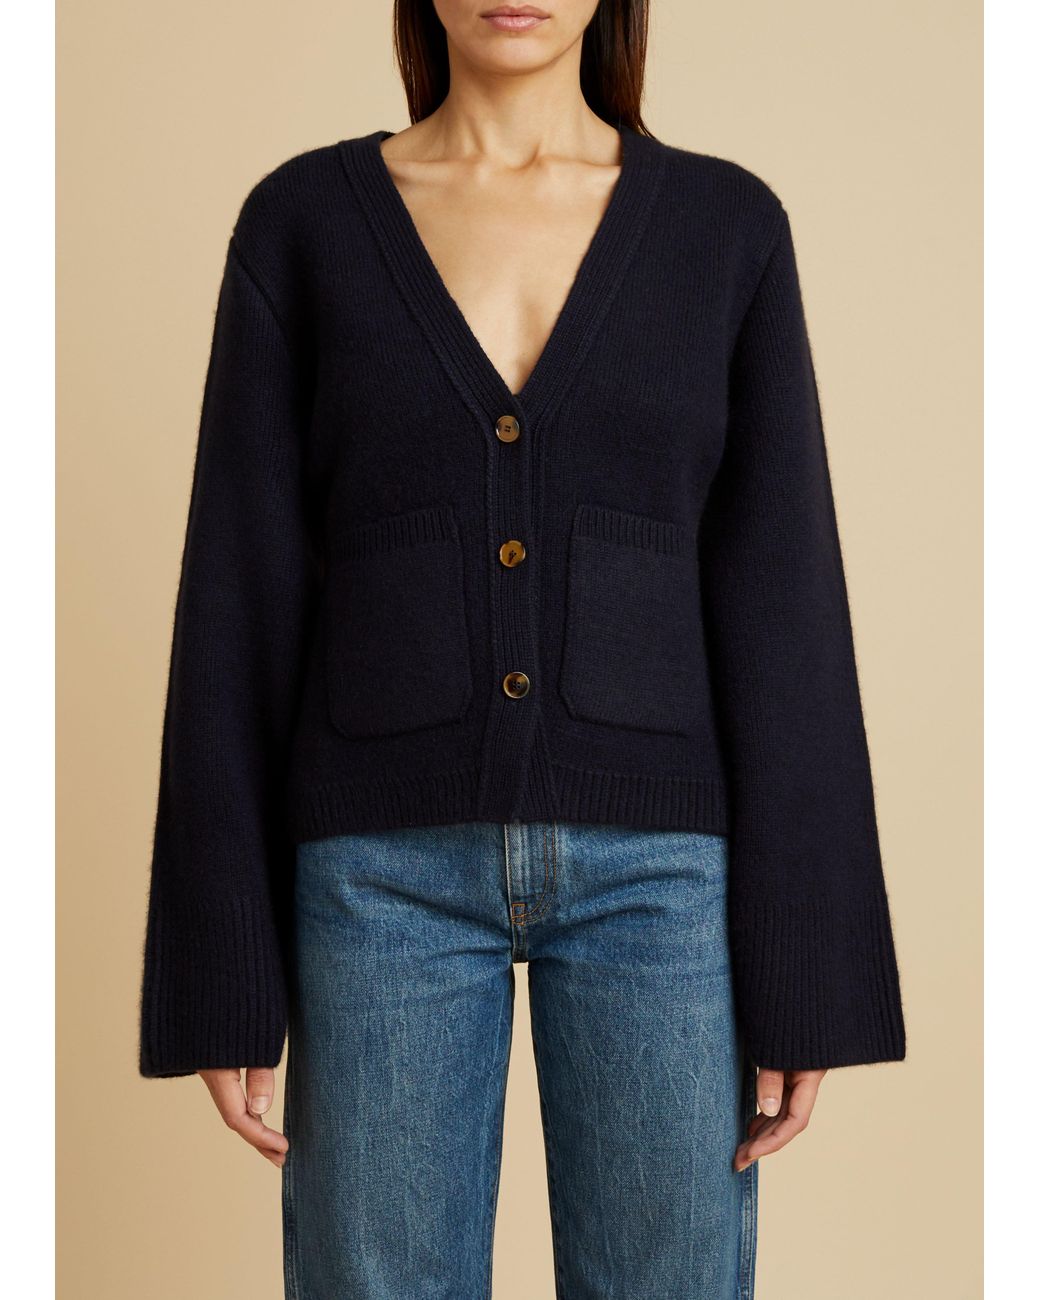 Khaite Cashmere The Scarlet Cardigan in Blue - Lyst